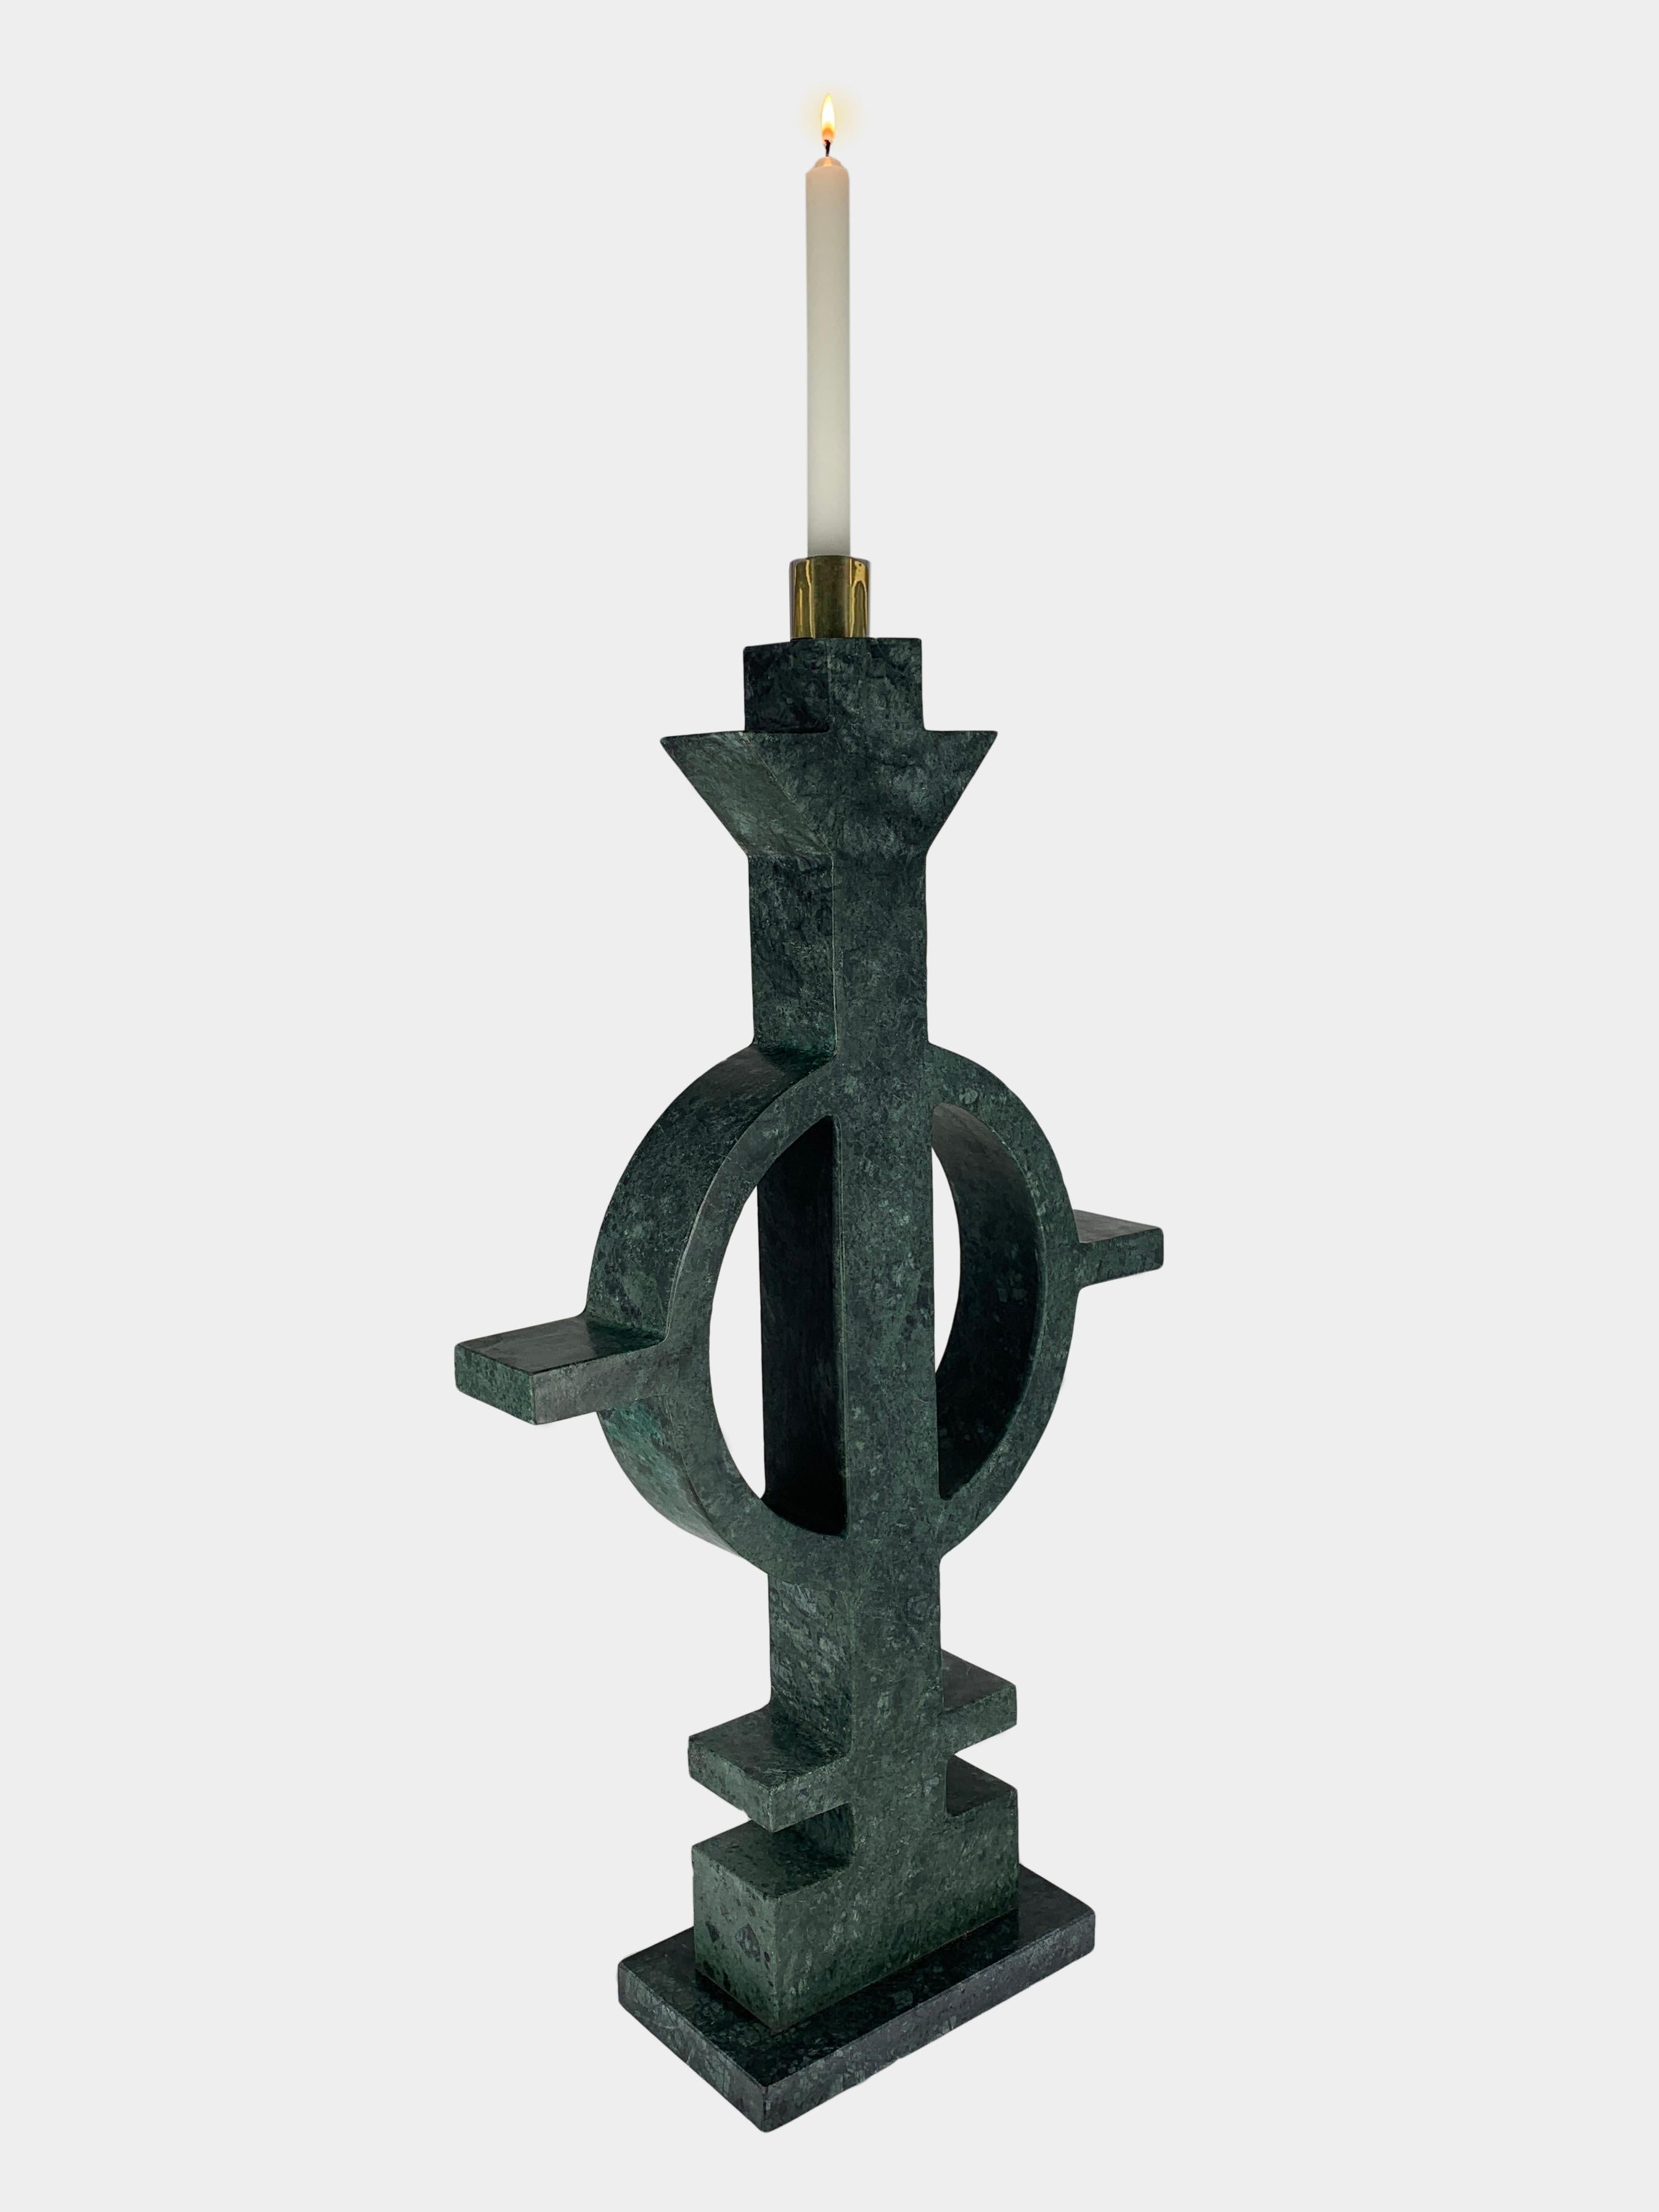 Marble Totem I, candleholder sculpture, Hand-sculpted Work by Arturo Erbsman
Signed and numbered, I from a limited edition of VIII
Composition: Marble, solid brass
Dimensions: 62 x 36 x 11 cm

Arturo Erbsman is a French designer whose works